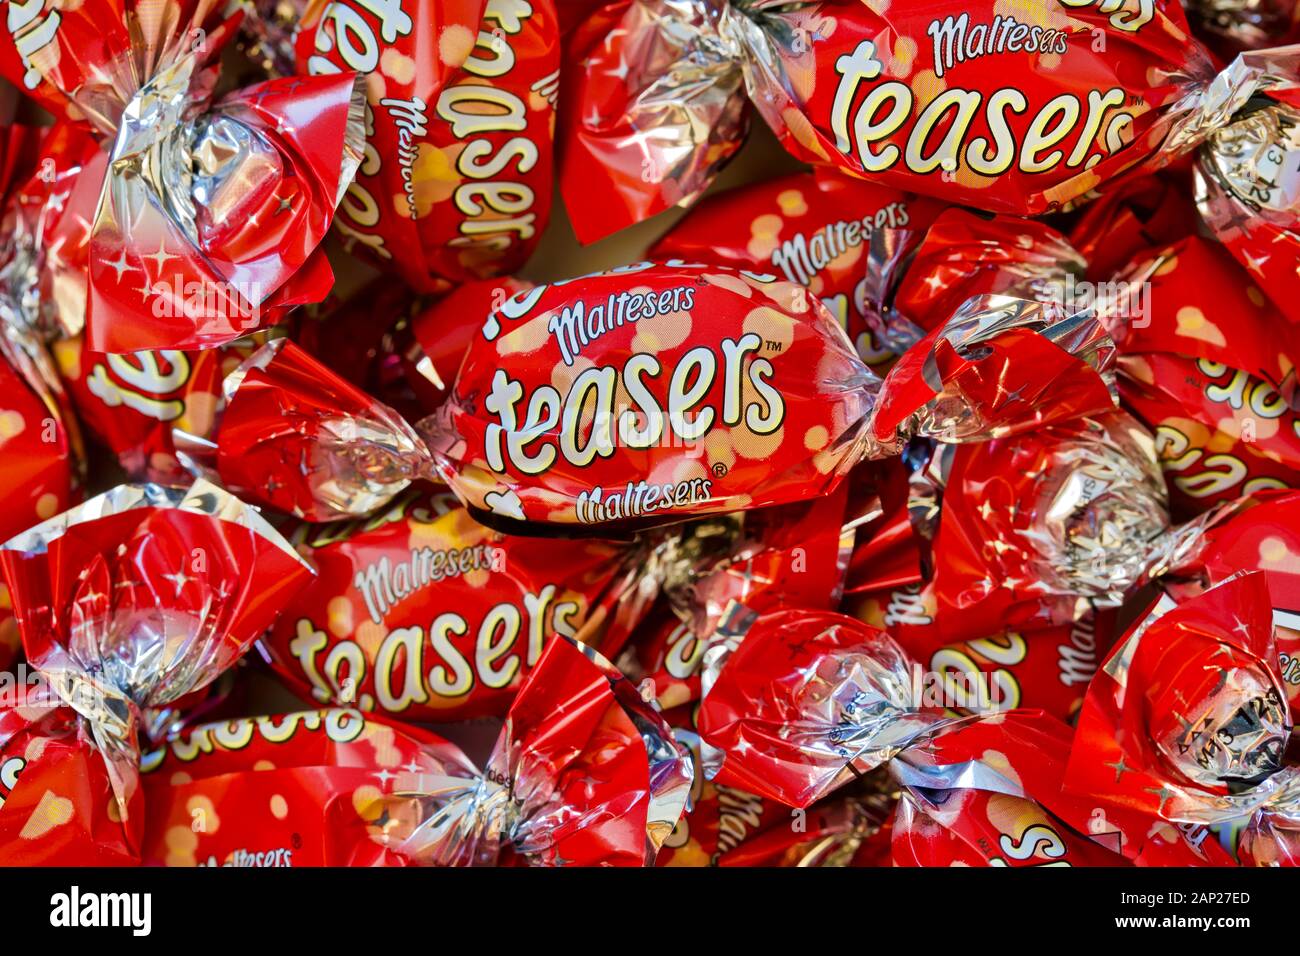 Maltesers Teasers Individually wrapped chocolates Stock Photo